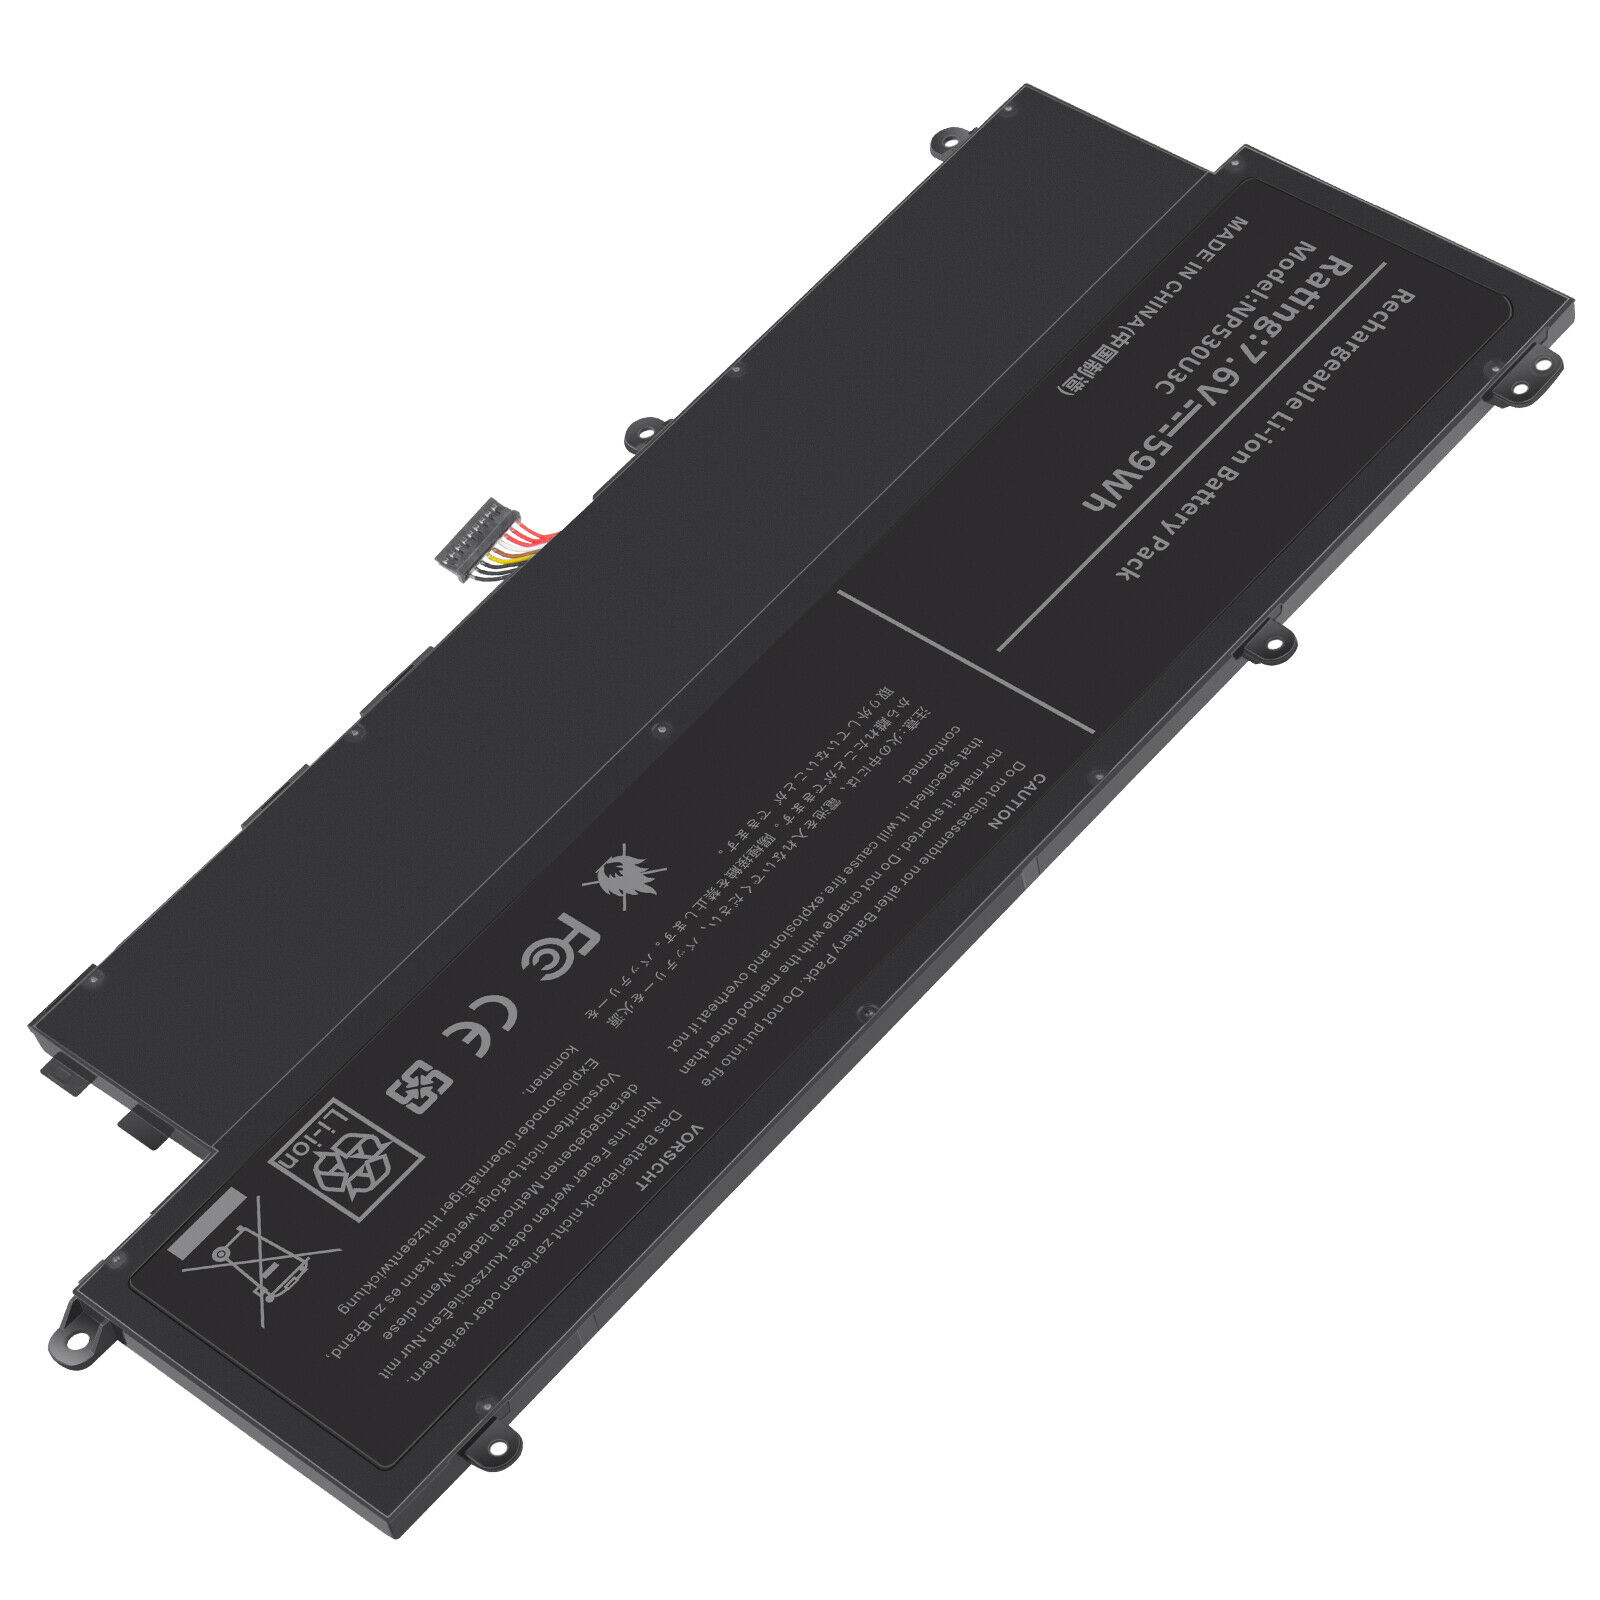 Samsung 530U3C-A0G Replacement Battery 1